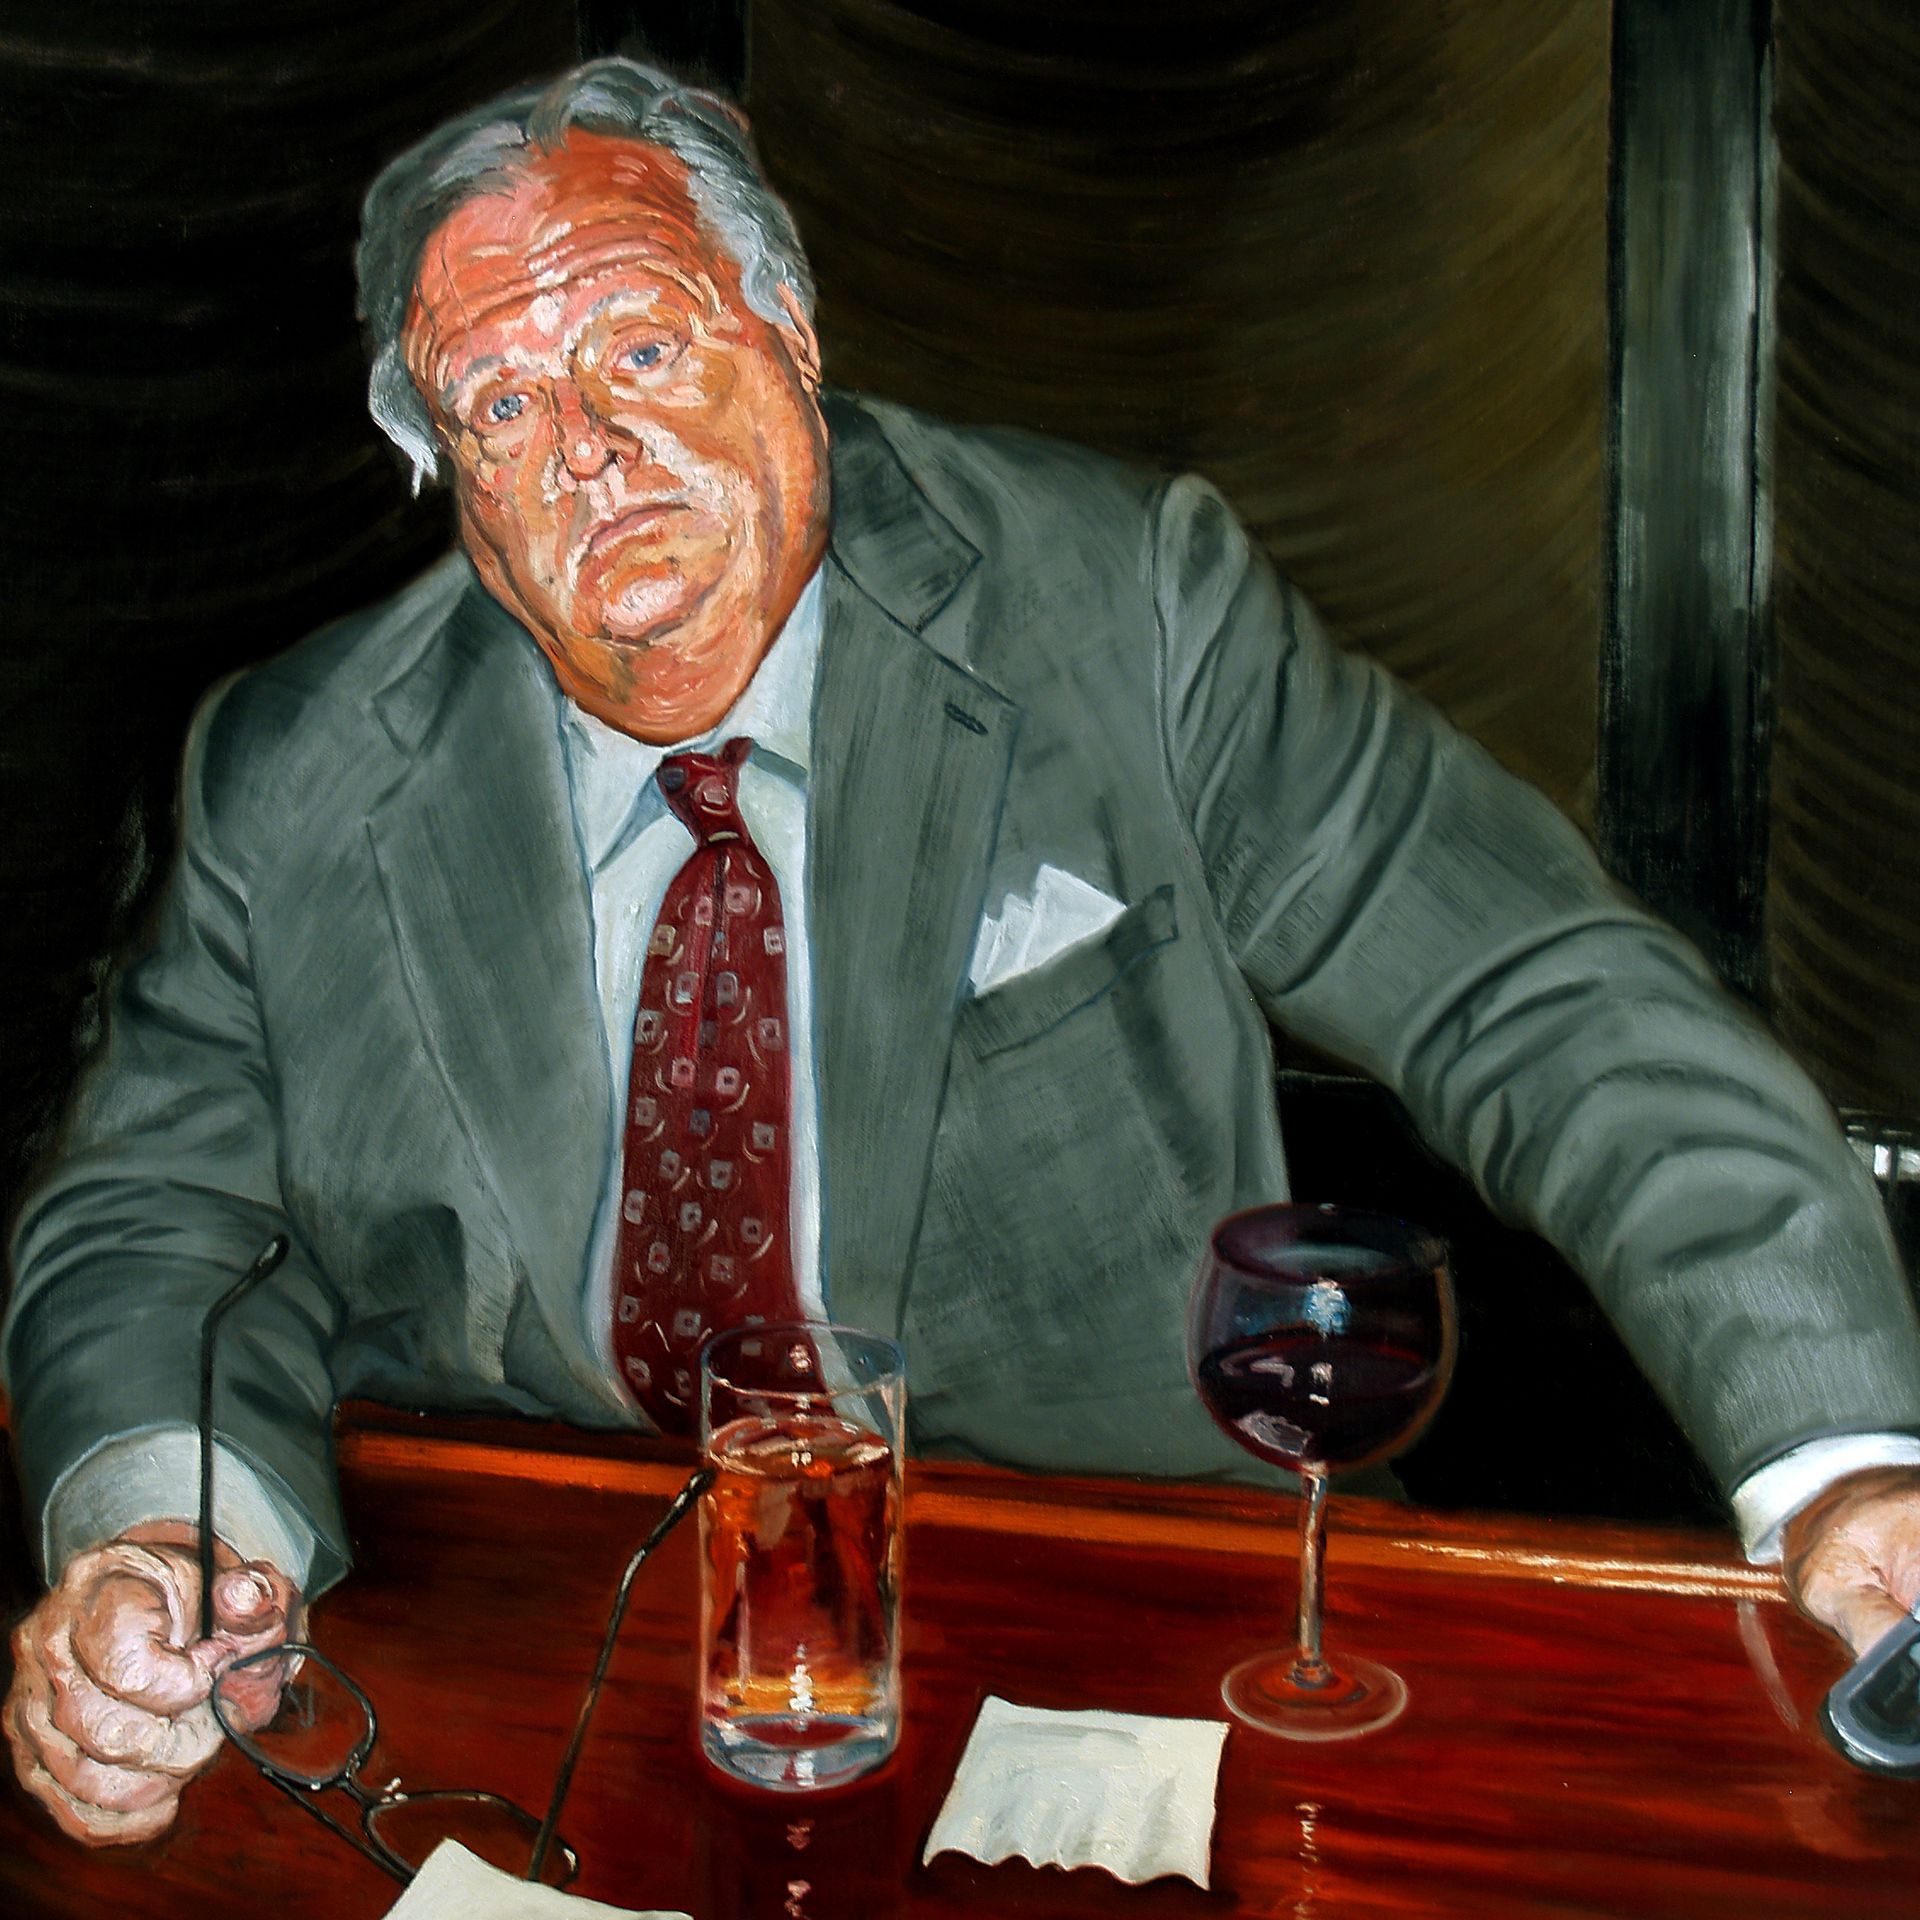 Sir Charles | Figurative Oil Painting by John Varriano